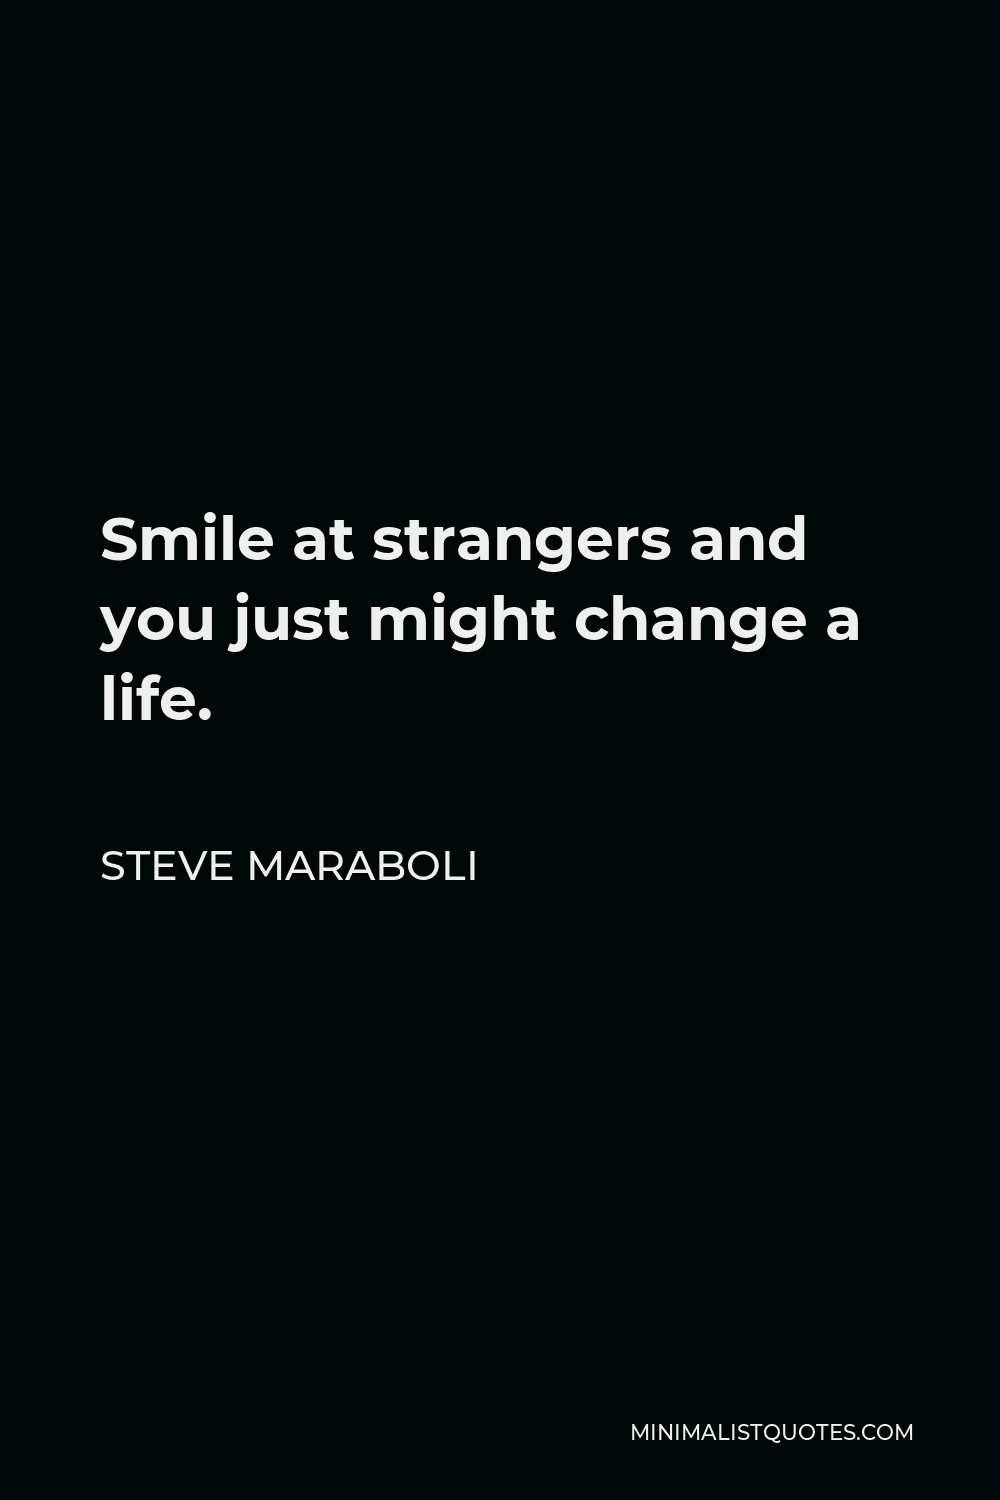 Steve Maraboli Quote - Smile at strangers and you just might change a life.